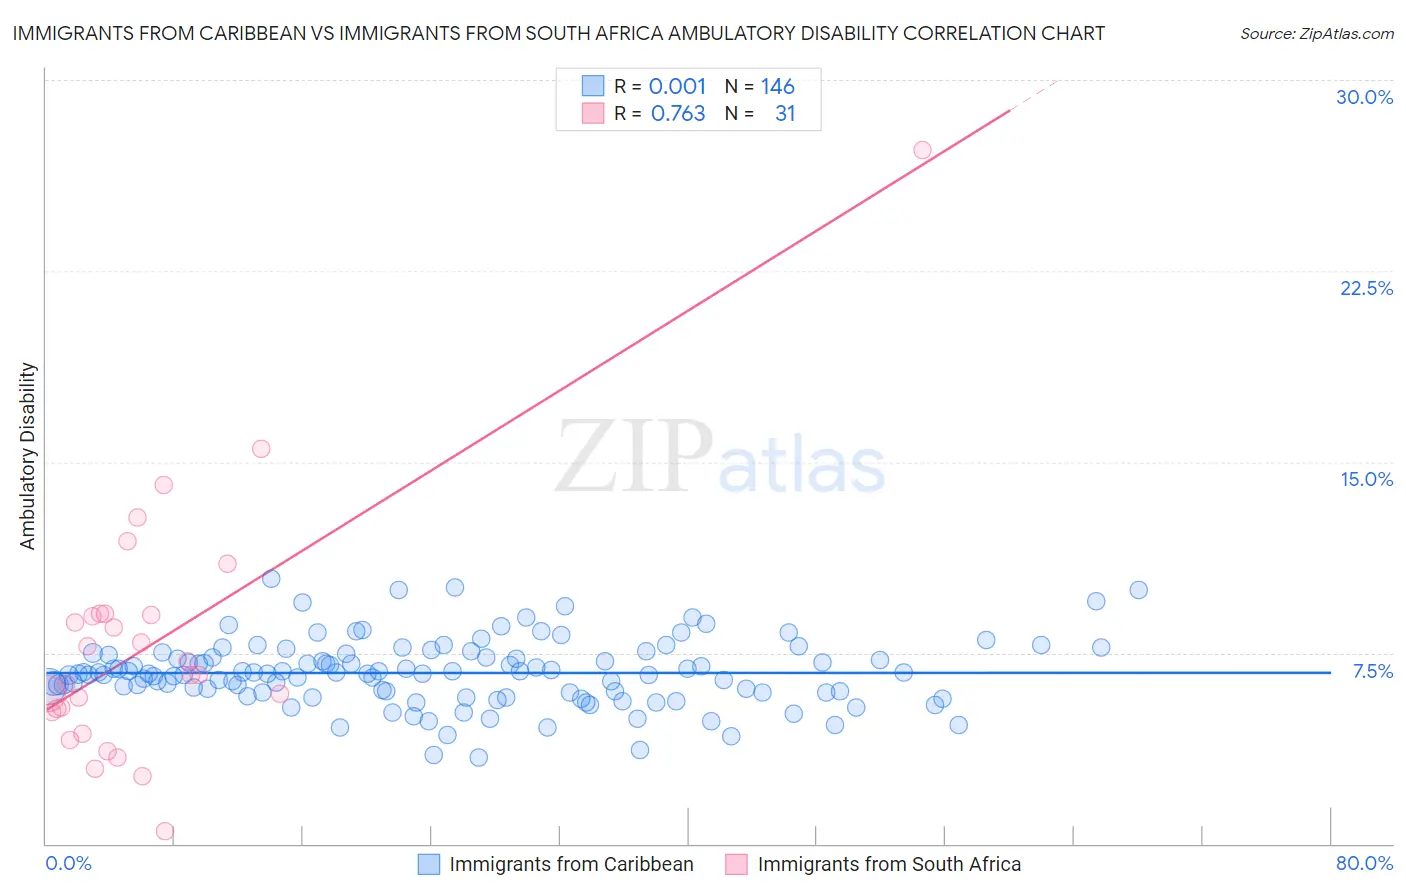 Immigrants from Caribbean vs Immigrants from South Africa Ambulatory Disability